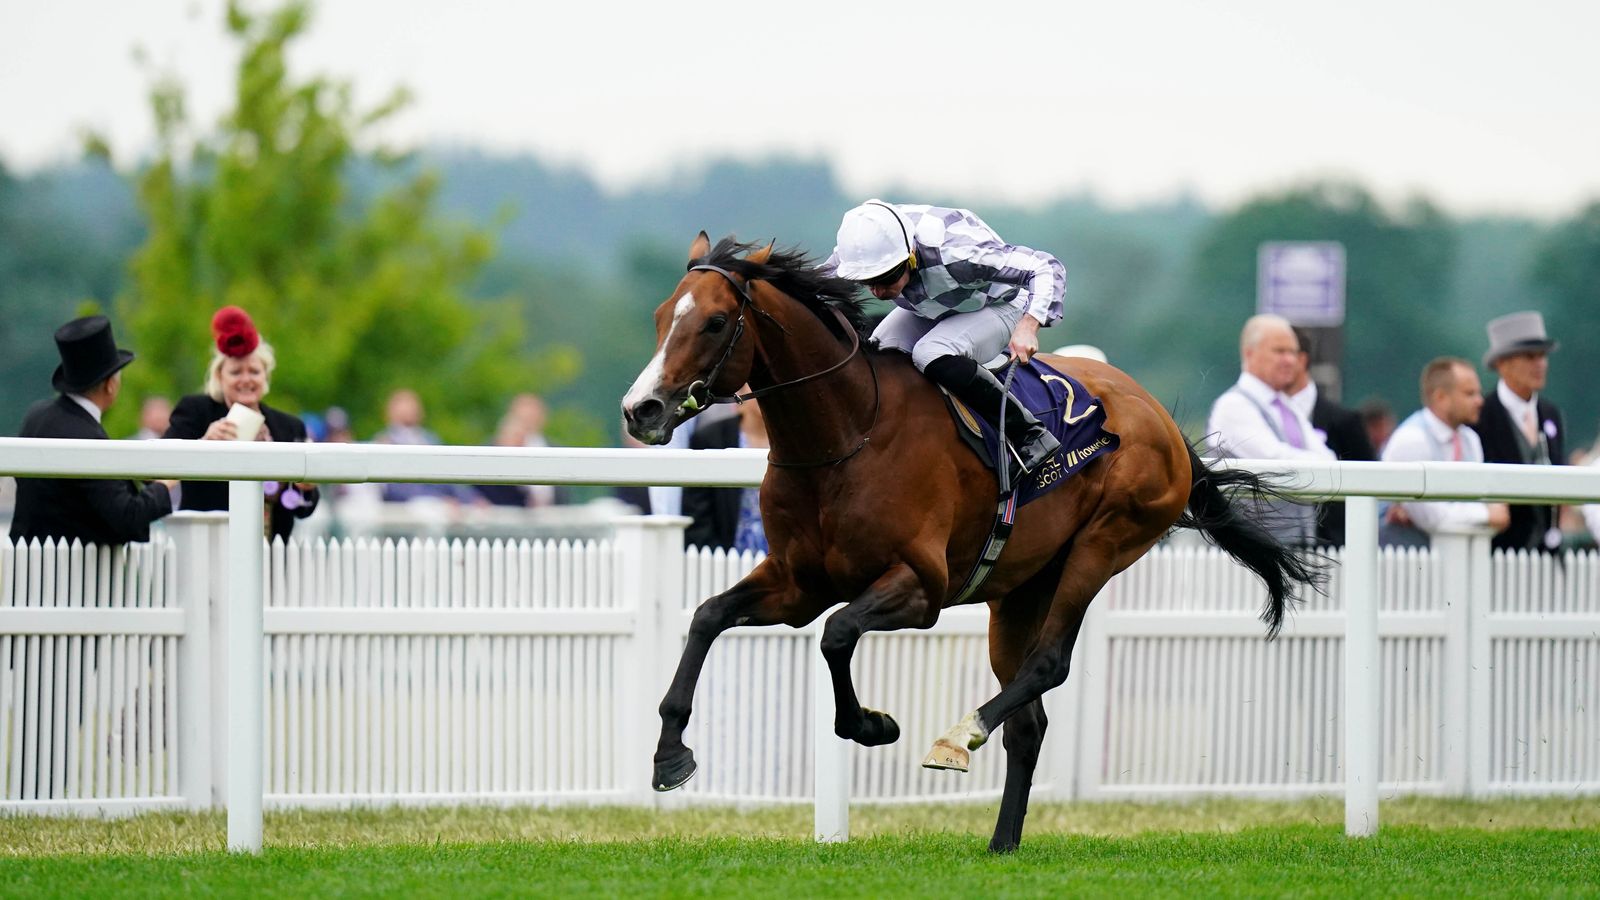 Hardwicke Stakes: Broome leads all the way for Ryan Moore and Aidan O’Brien; Hurricane Lane only third